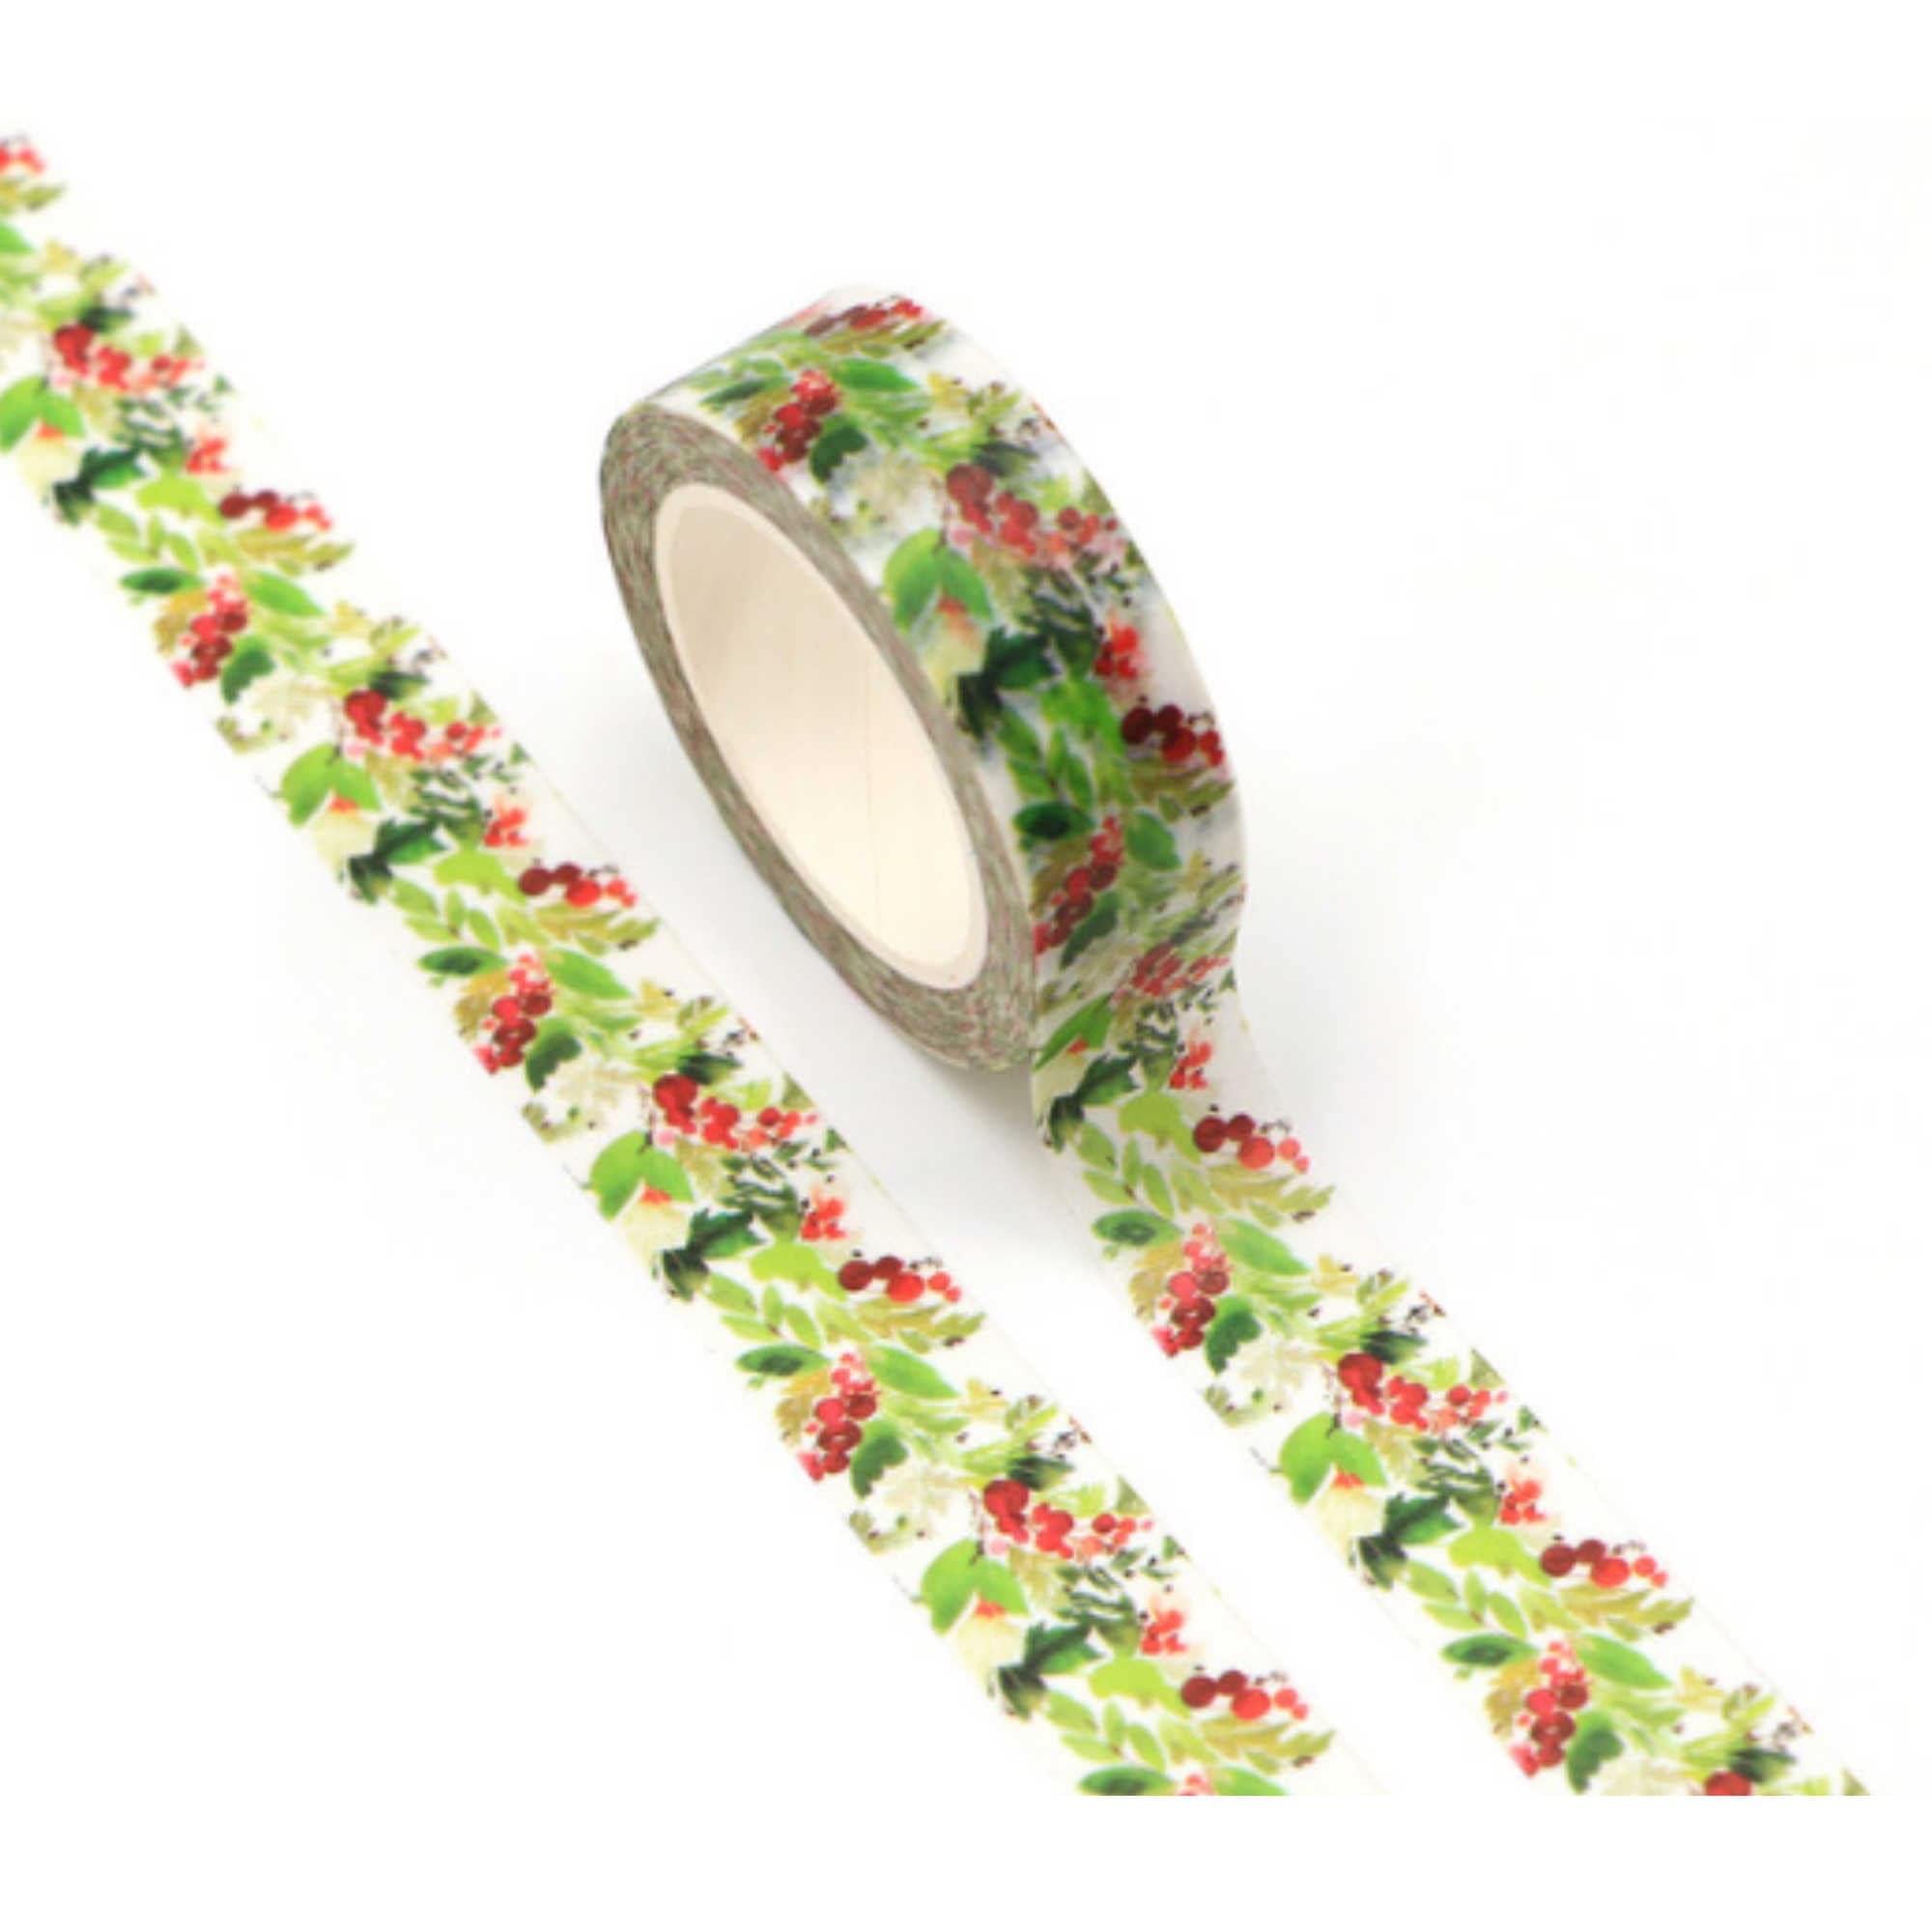 TW Collection Christmas Watercolor Holly Washi Tape by SSC Designs - 15mm x 30 Feet